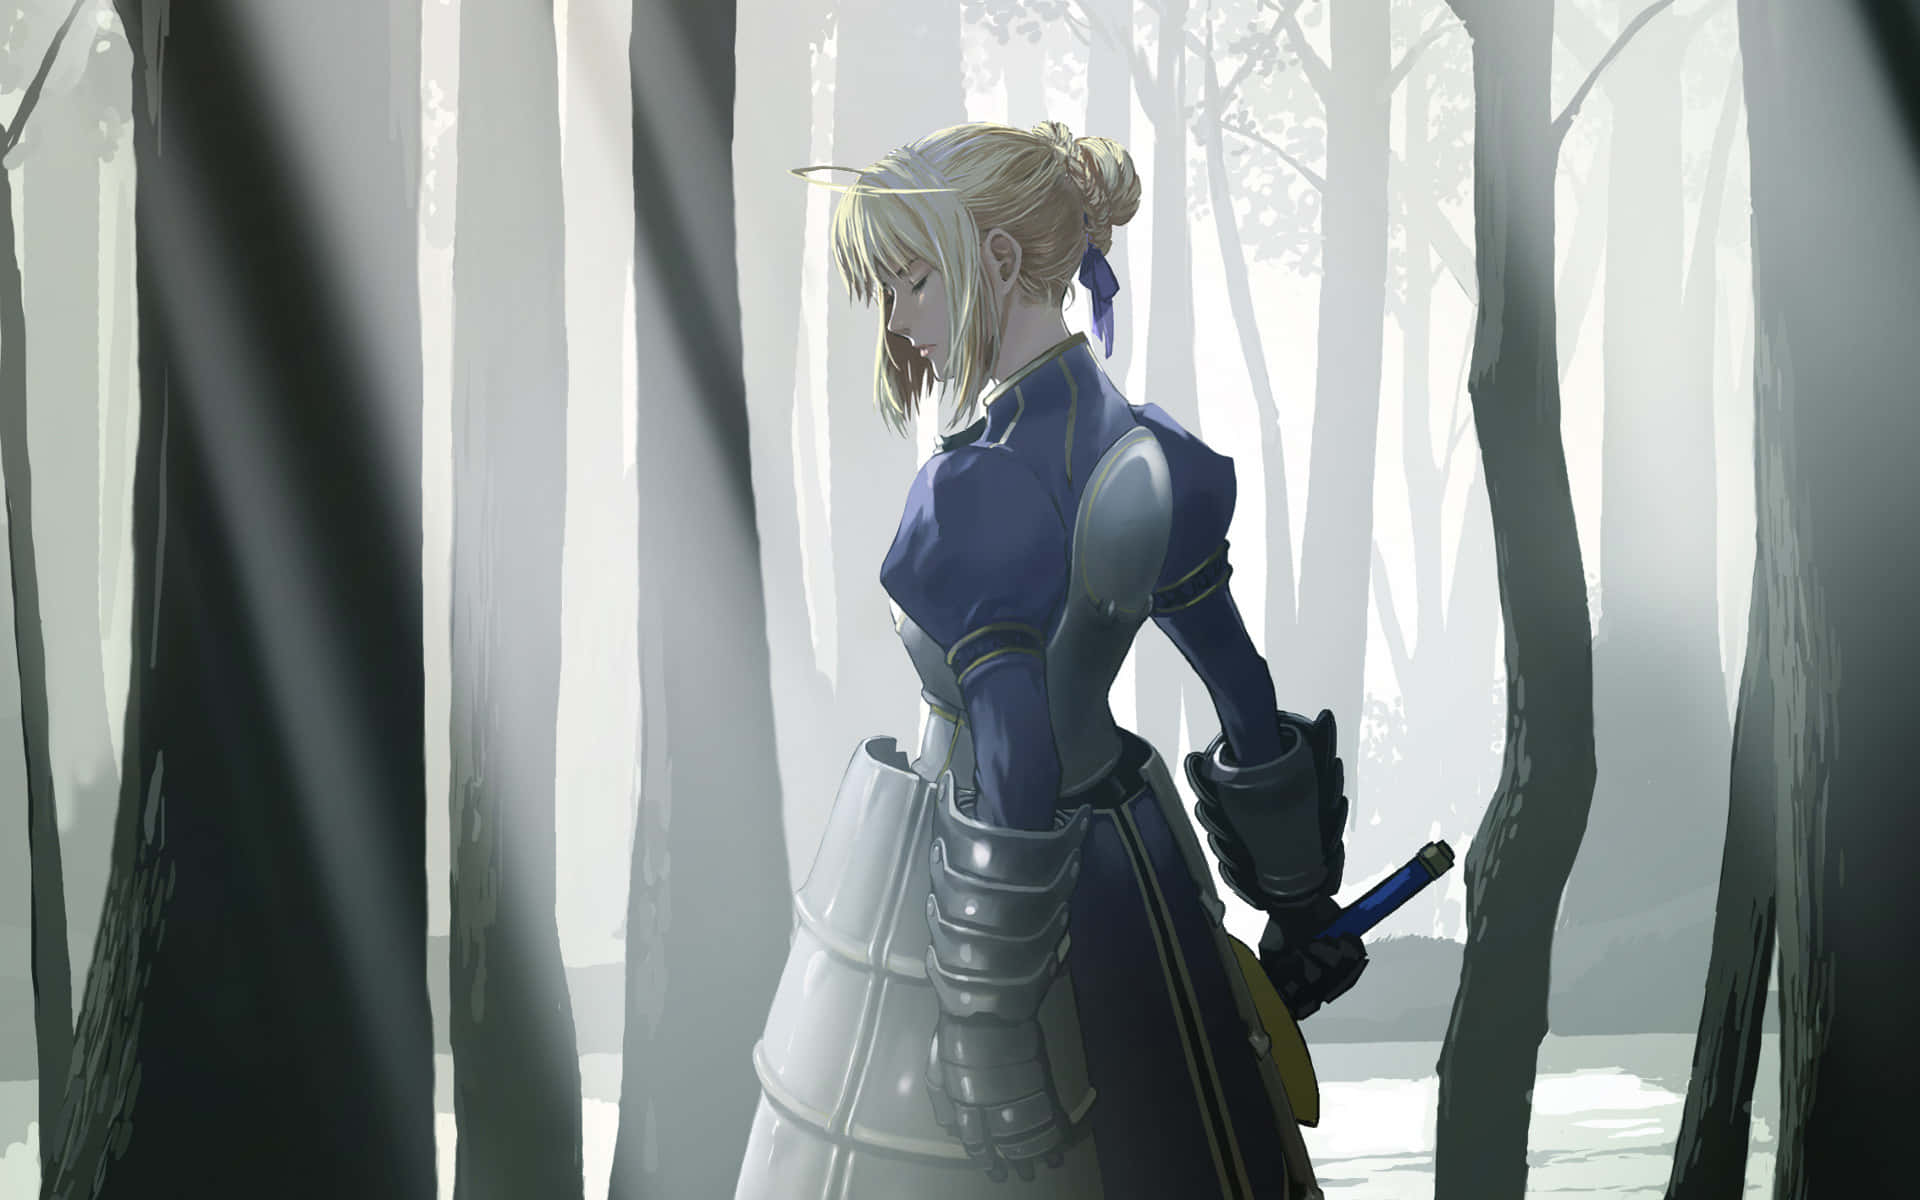 Saber Fate Stay Night In The Woods Wallpaper